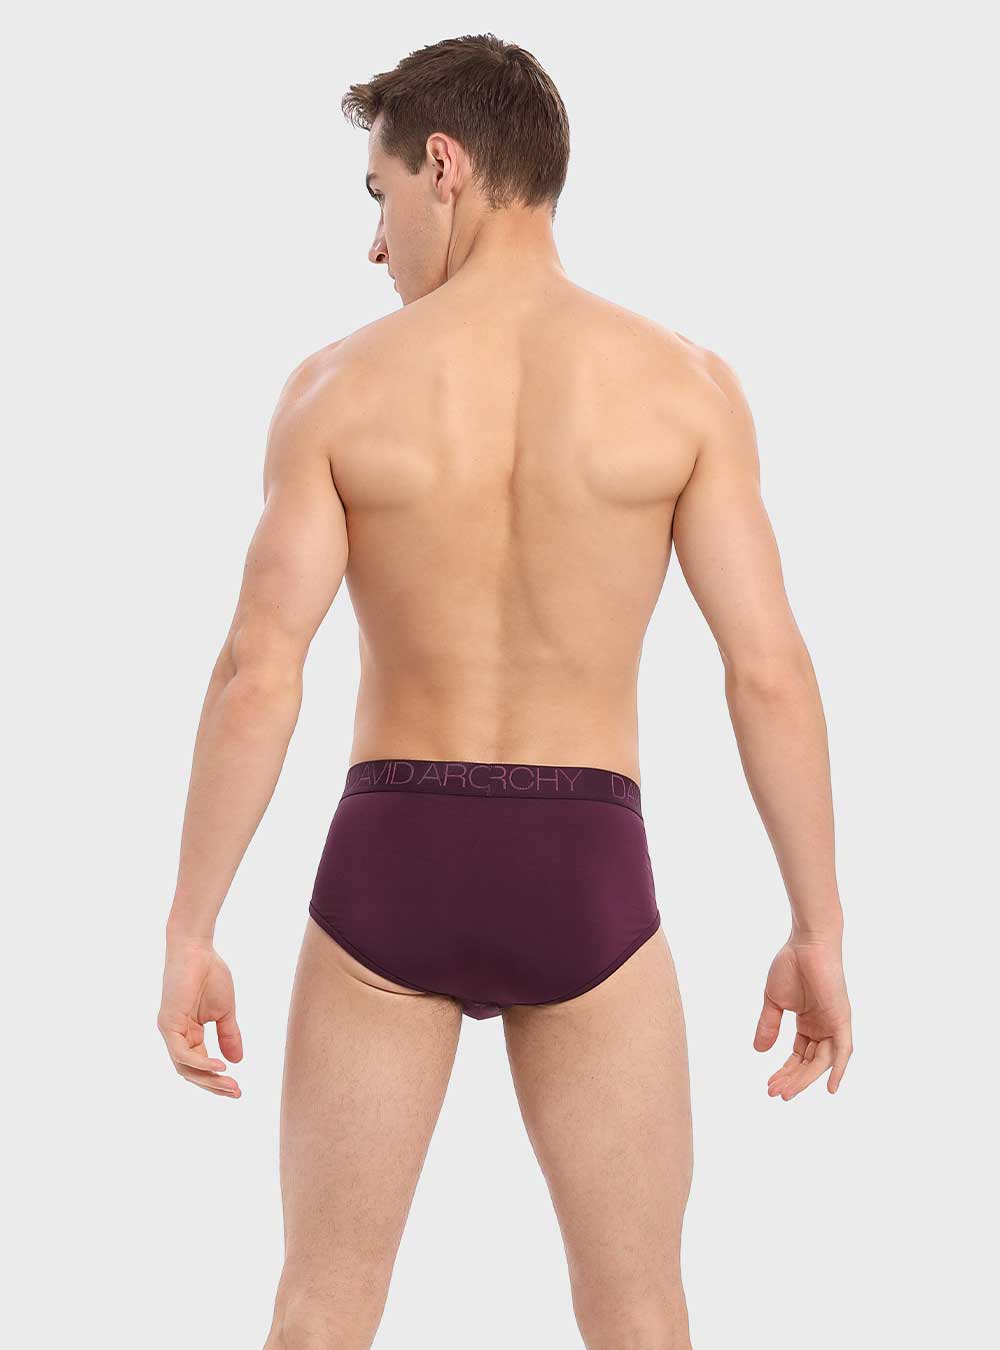 Mens Modal Cotton Bamboo Briefs Mens With U Pouch Breathable And  Comfortable Underwear For A Stylish Look From Odelettu, $19.03